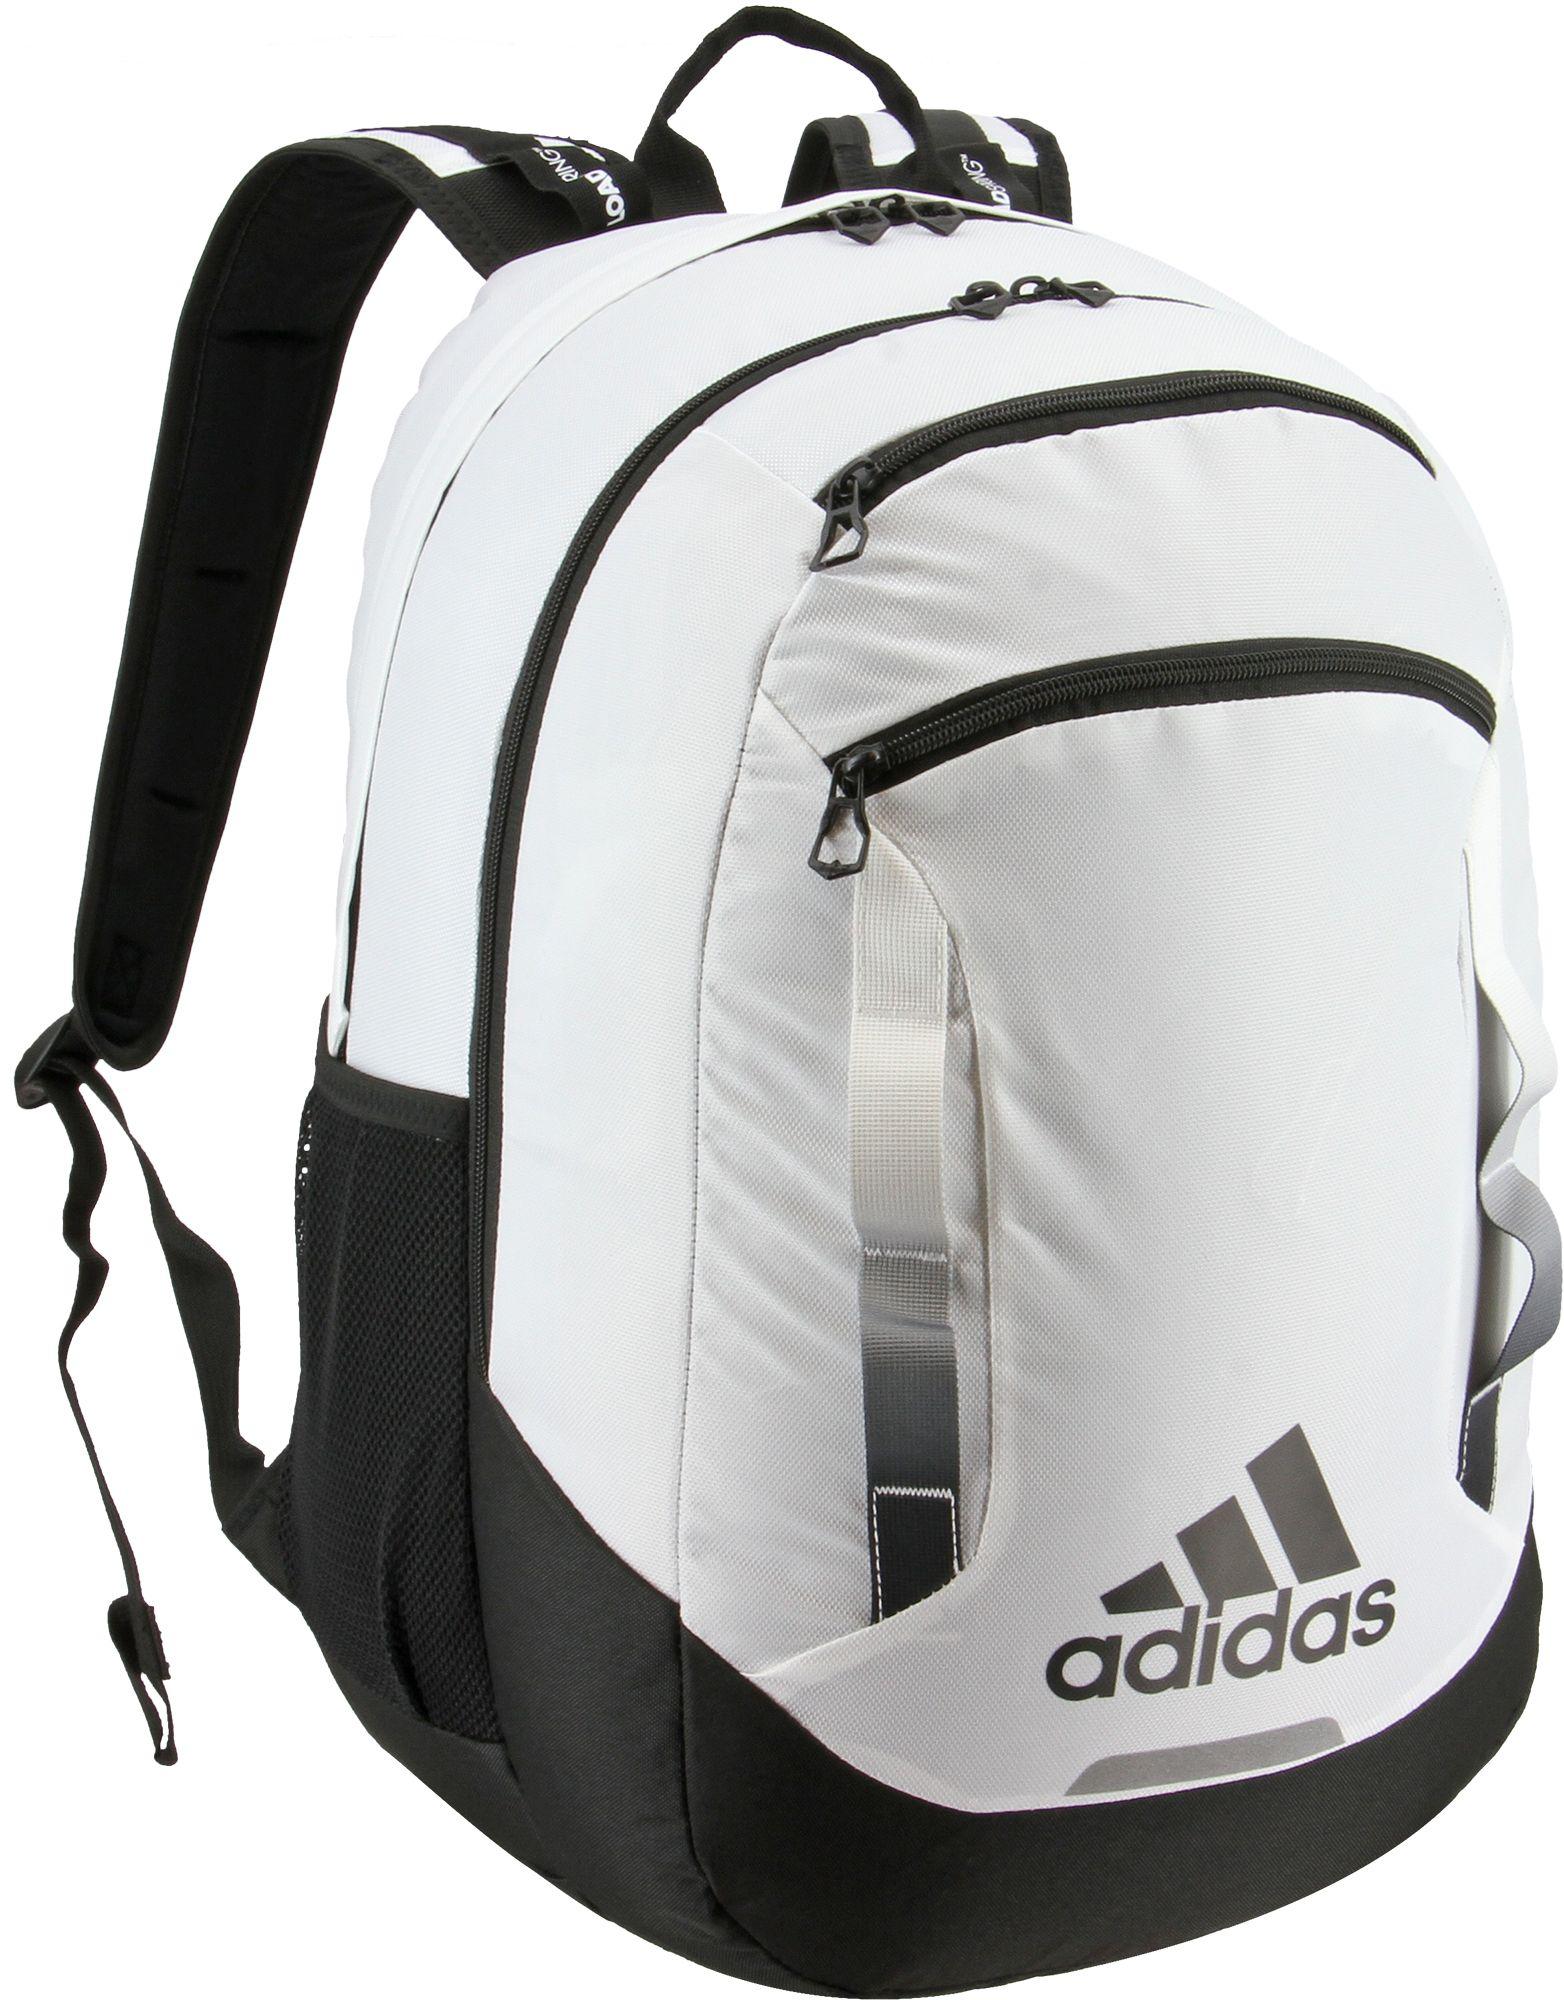 adidas white and black backpack